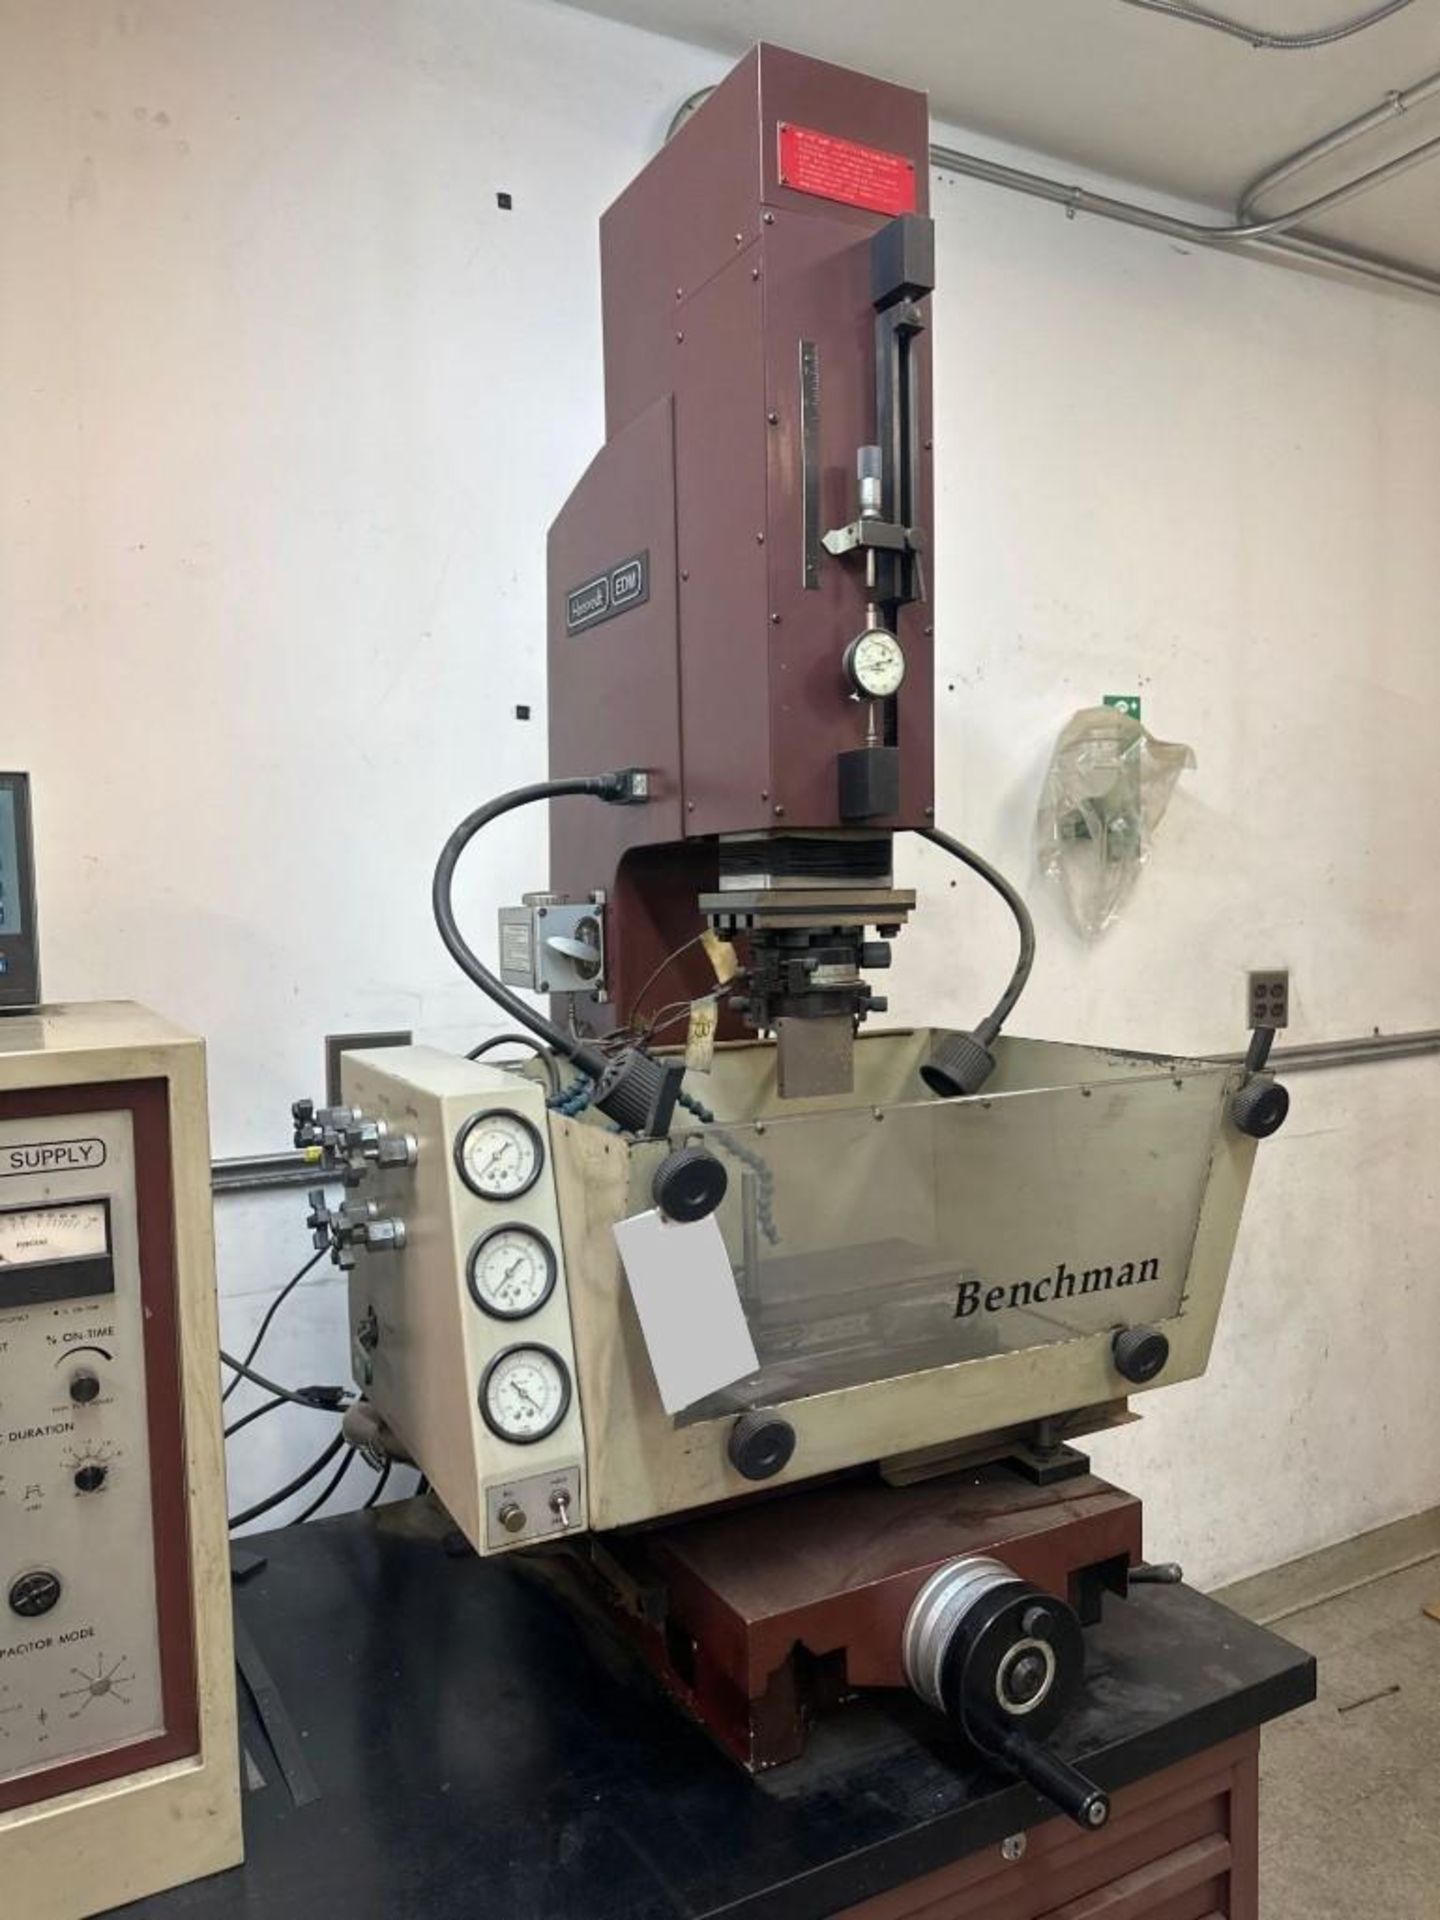 Hansvedt Benchman Sinker EDM, 20 Amps, Table Size: 9" x 14.1", X-Axis 8.4", Y-Axis 5.5" - Image 5 of 9